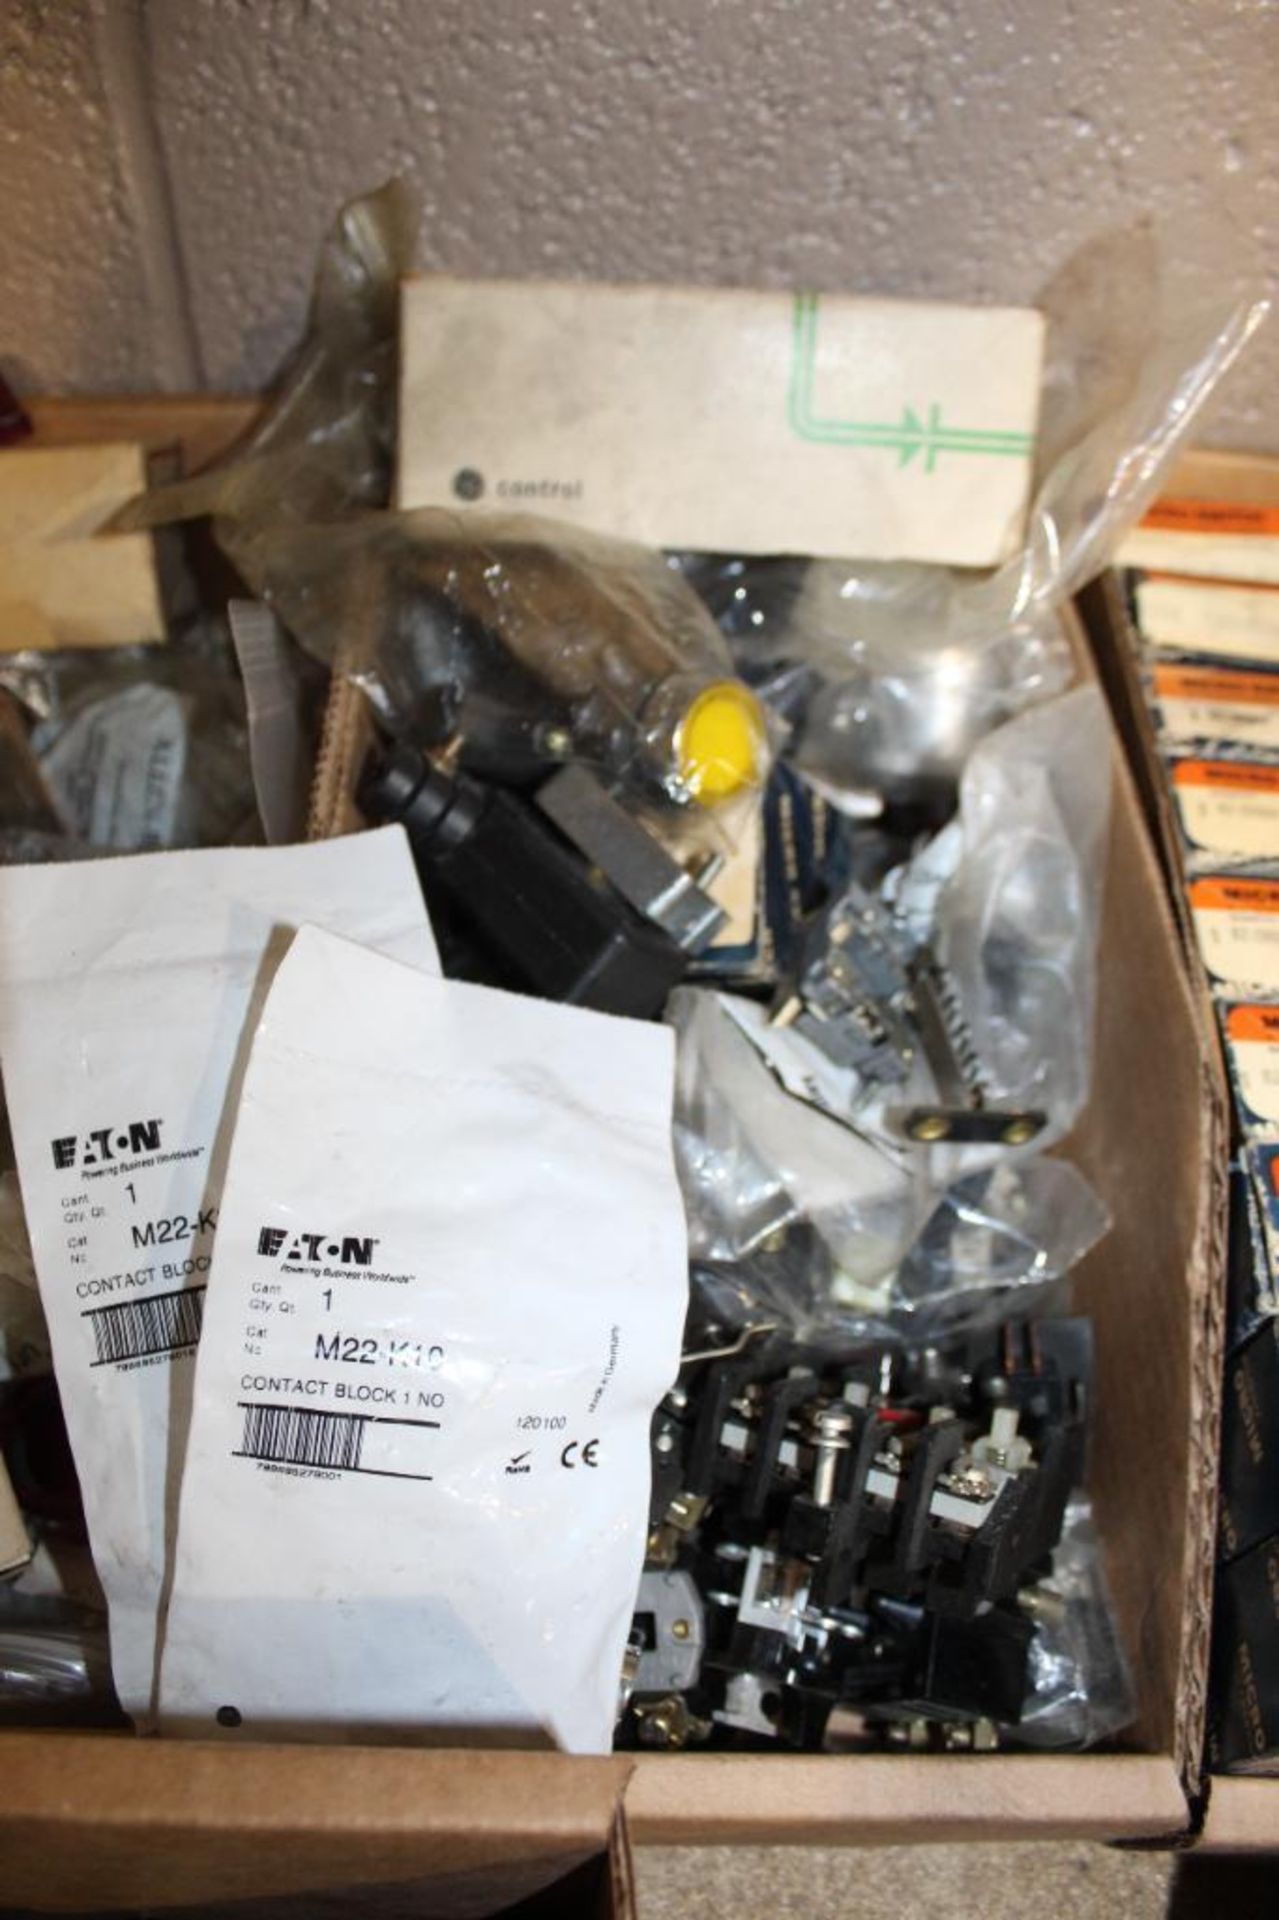 Lot of (3) Boxes Assorted Push Buttons, Cuttler Hammer Lens, Switchplates and Eaton Contact Block - Image 5 of 5